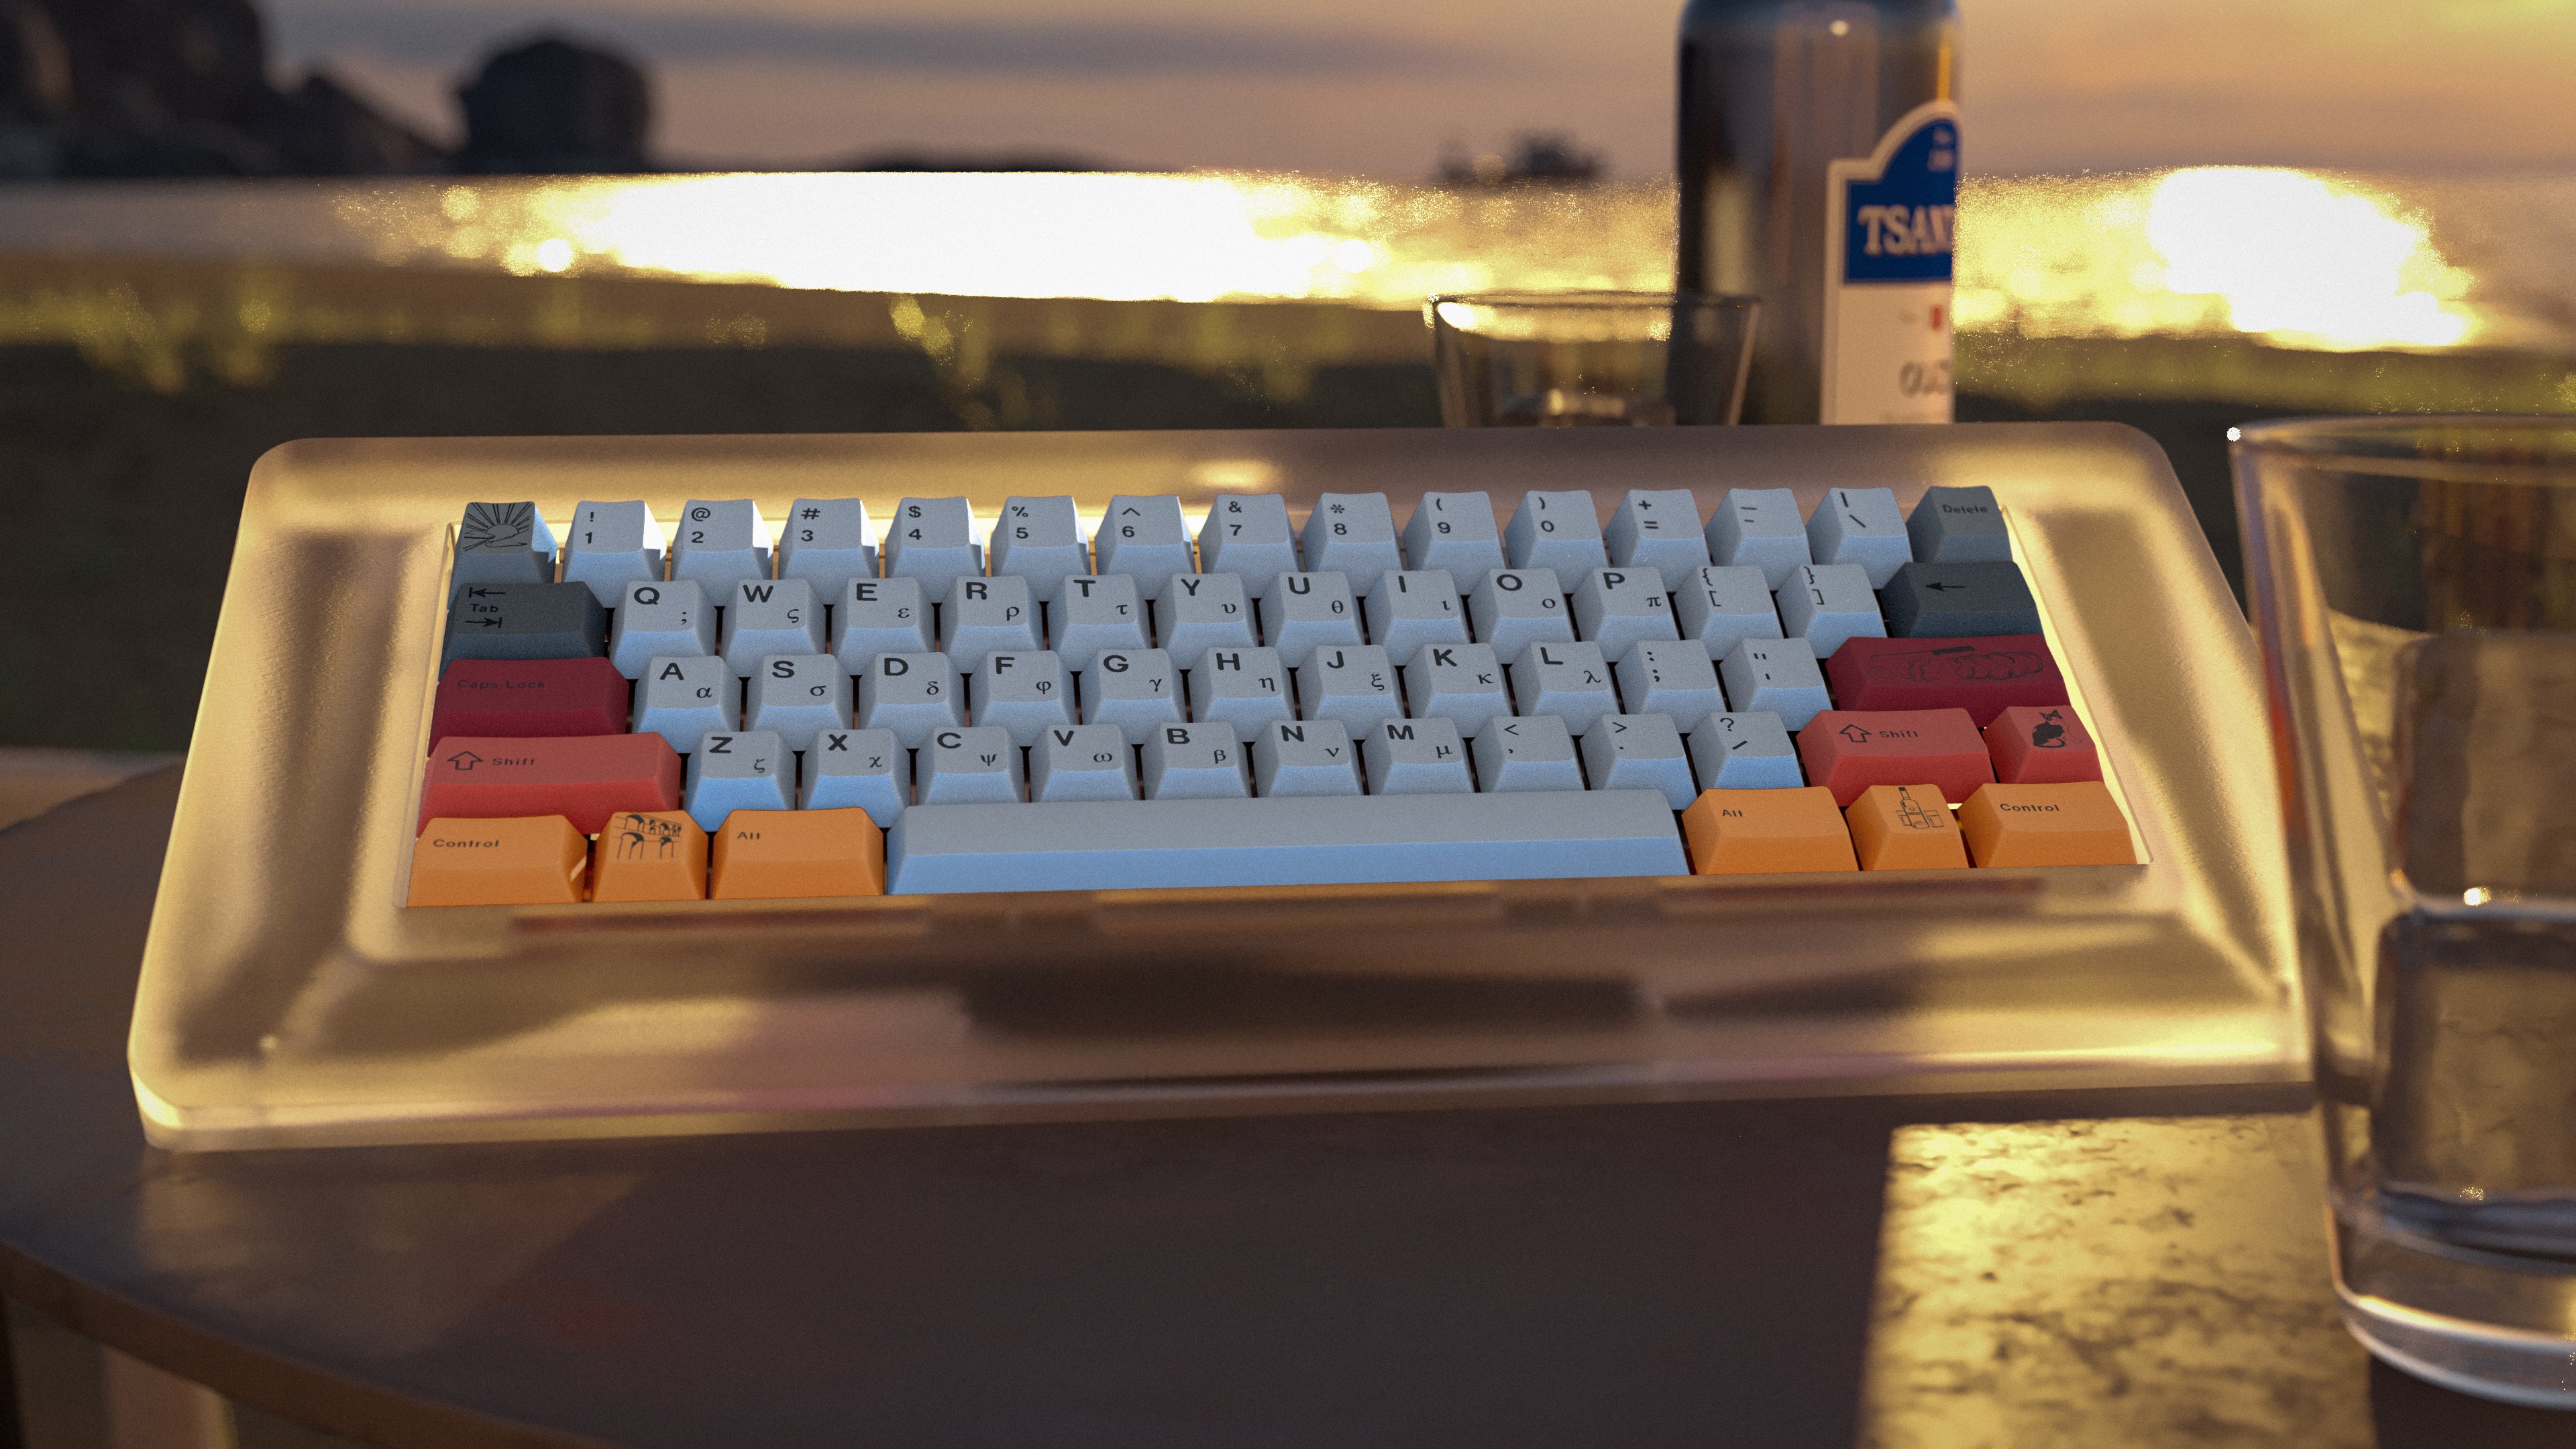 ePBT Kavala keycaps rendered on the Piggy60 mechanical keyboard.